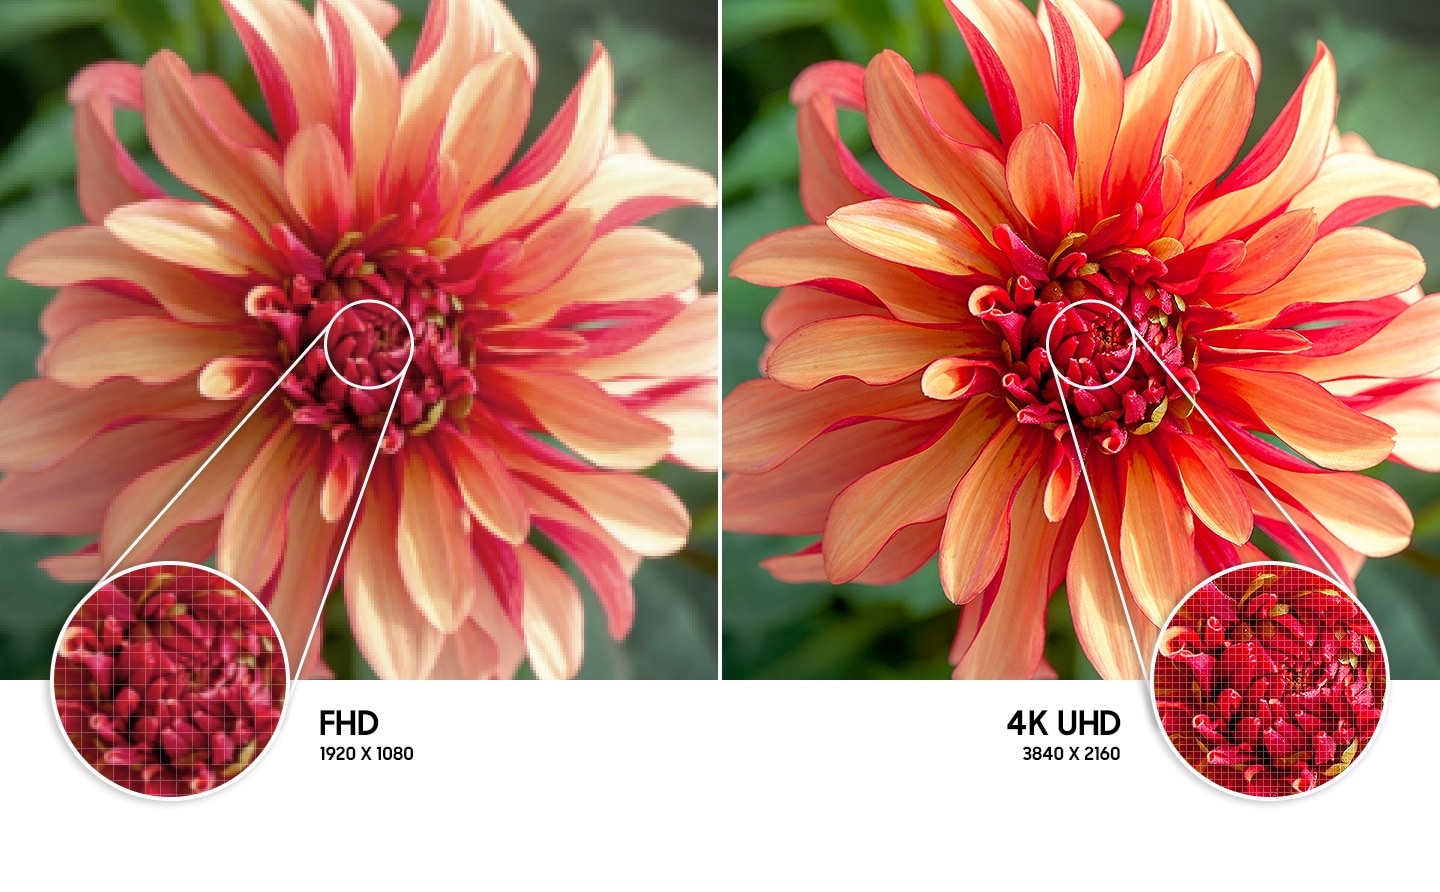 Samsung 43 inch Smart TV UA43AU7000; The flower image on the right compared to the left shows higher quality picture resolution created by 4K UHD technology.